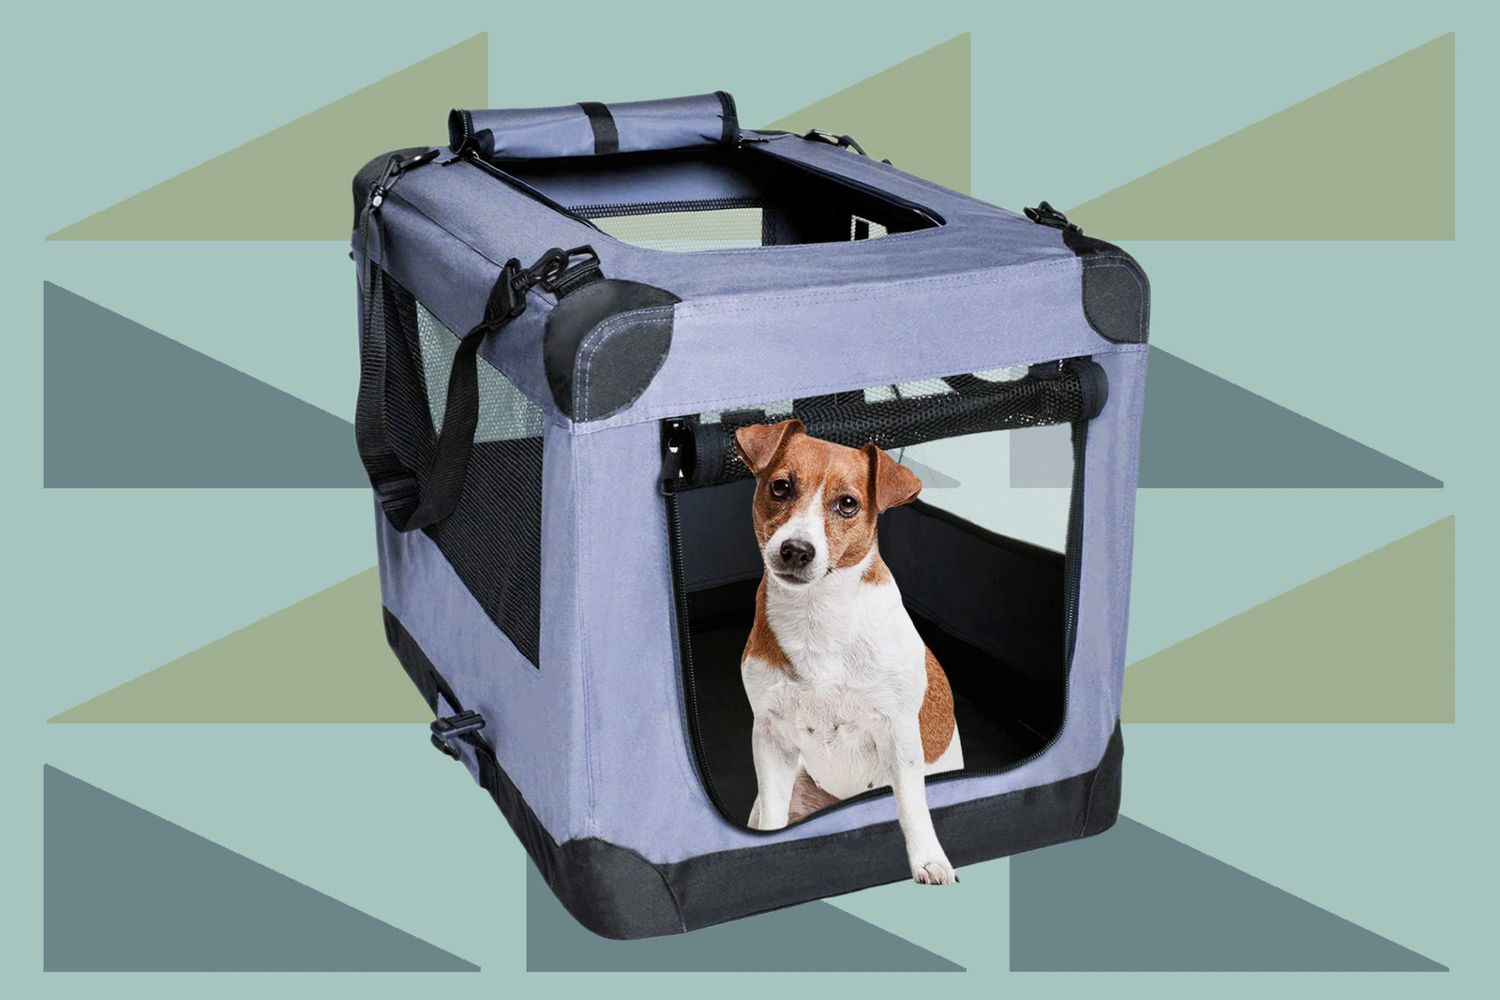 Lesure Small Dog Carrier Airline Approved Green Soft Sided Pet Carrier for Small Dogs and Medium Cats up to 15 Lbs Collapsible Puppy Carrier Dog Travel Bag 